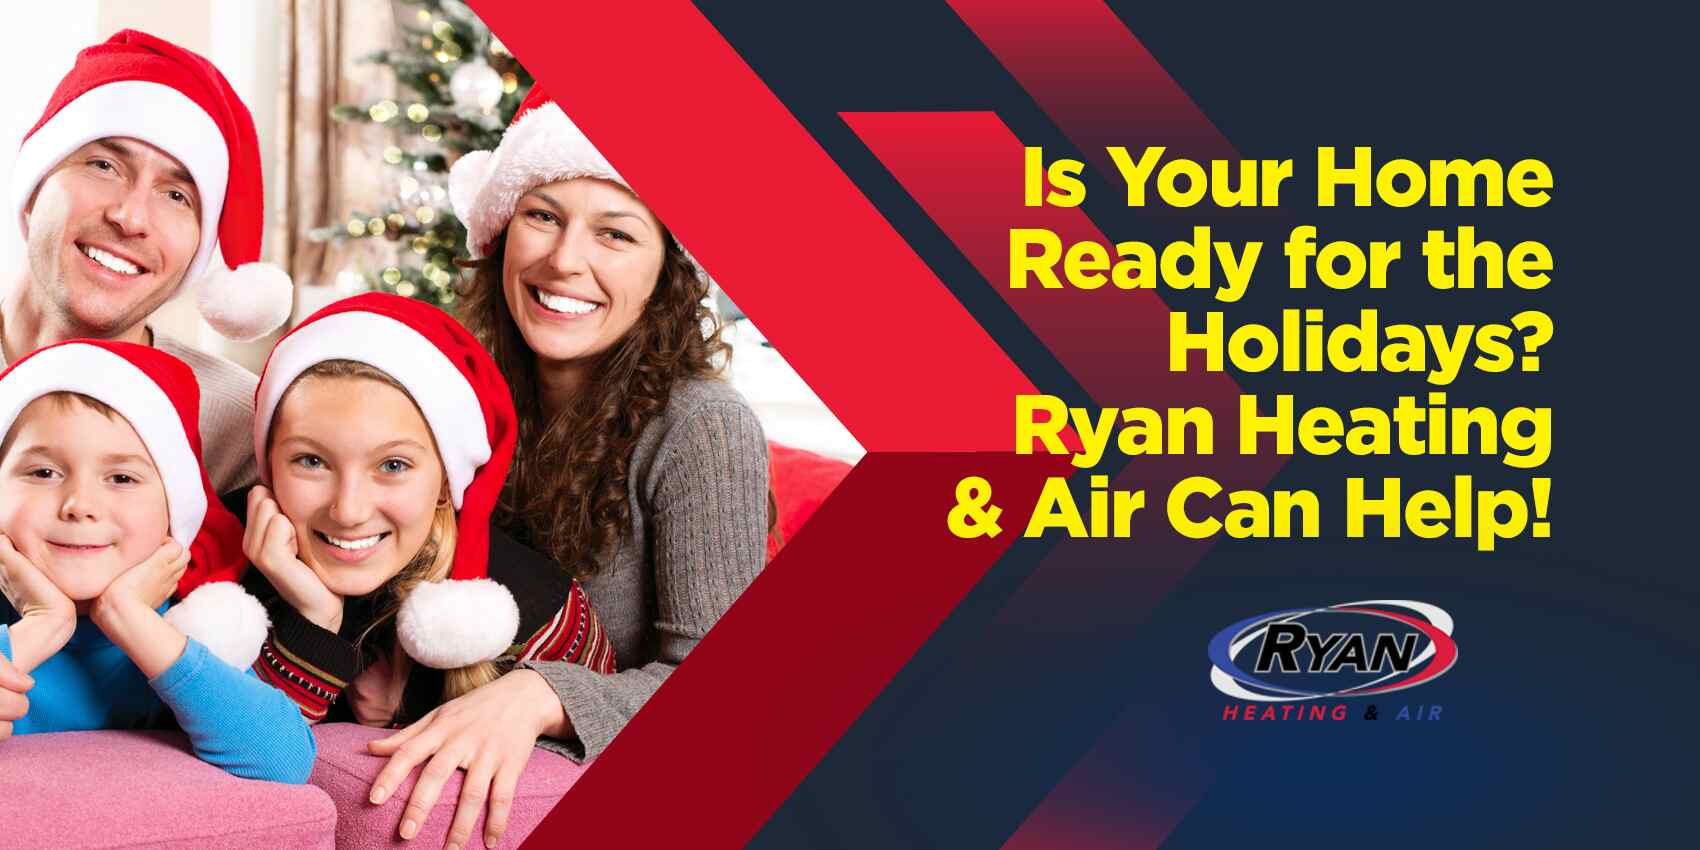 Is Your Home Ready for the Holidays? Ryan Heating & Air Can Help!